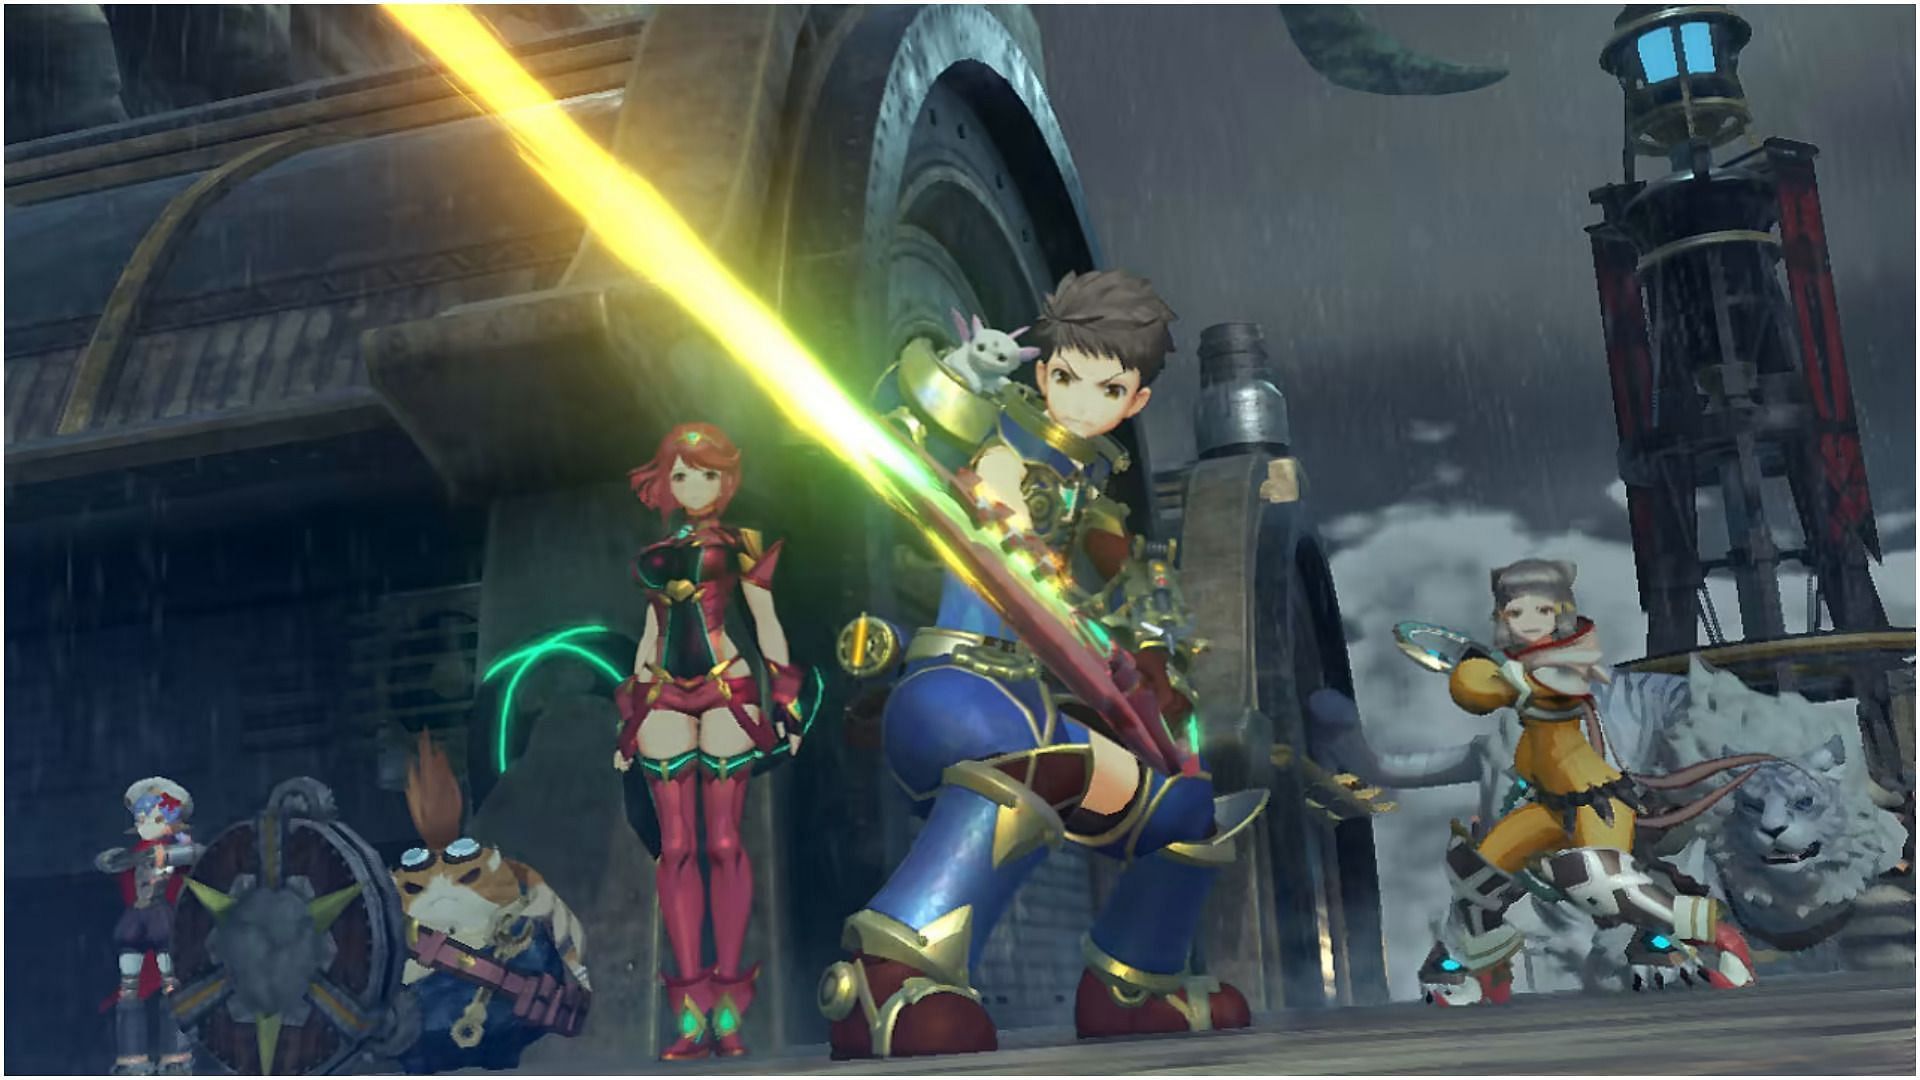 Xenoblade games are narrative and exploration driven RPGs (Screenshot from Xenoblade Chronicles 2)